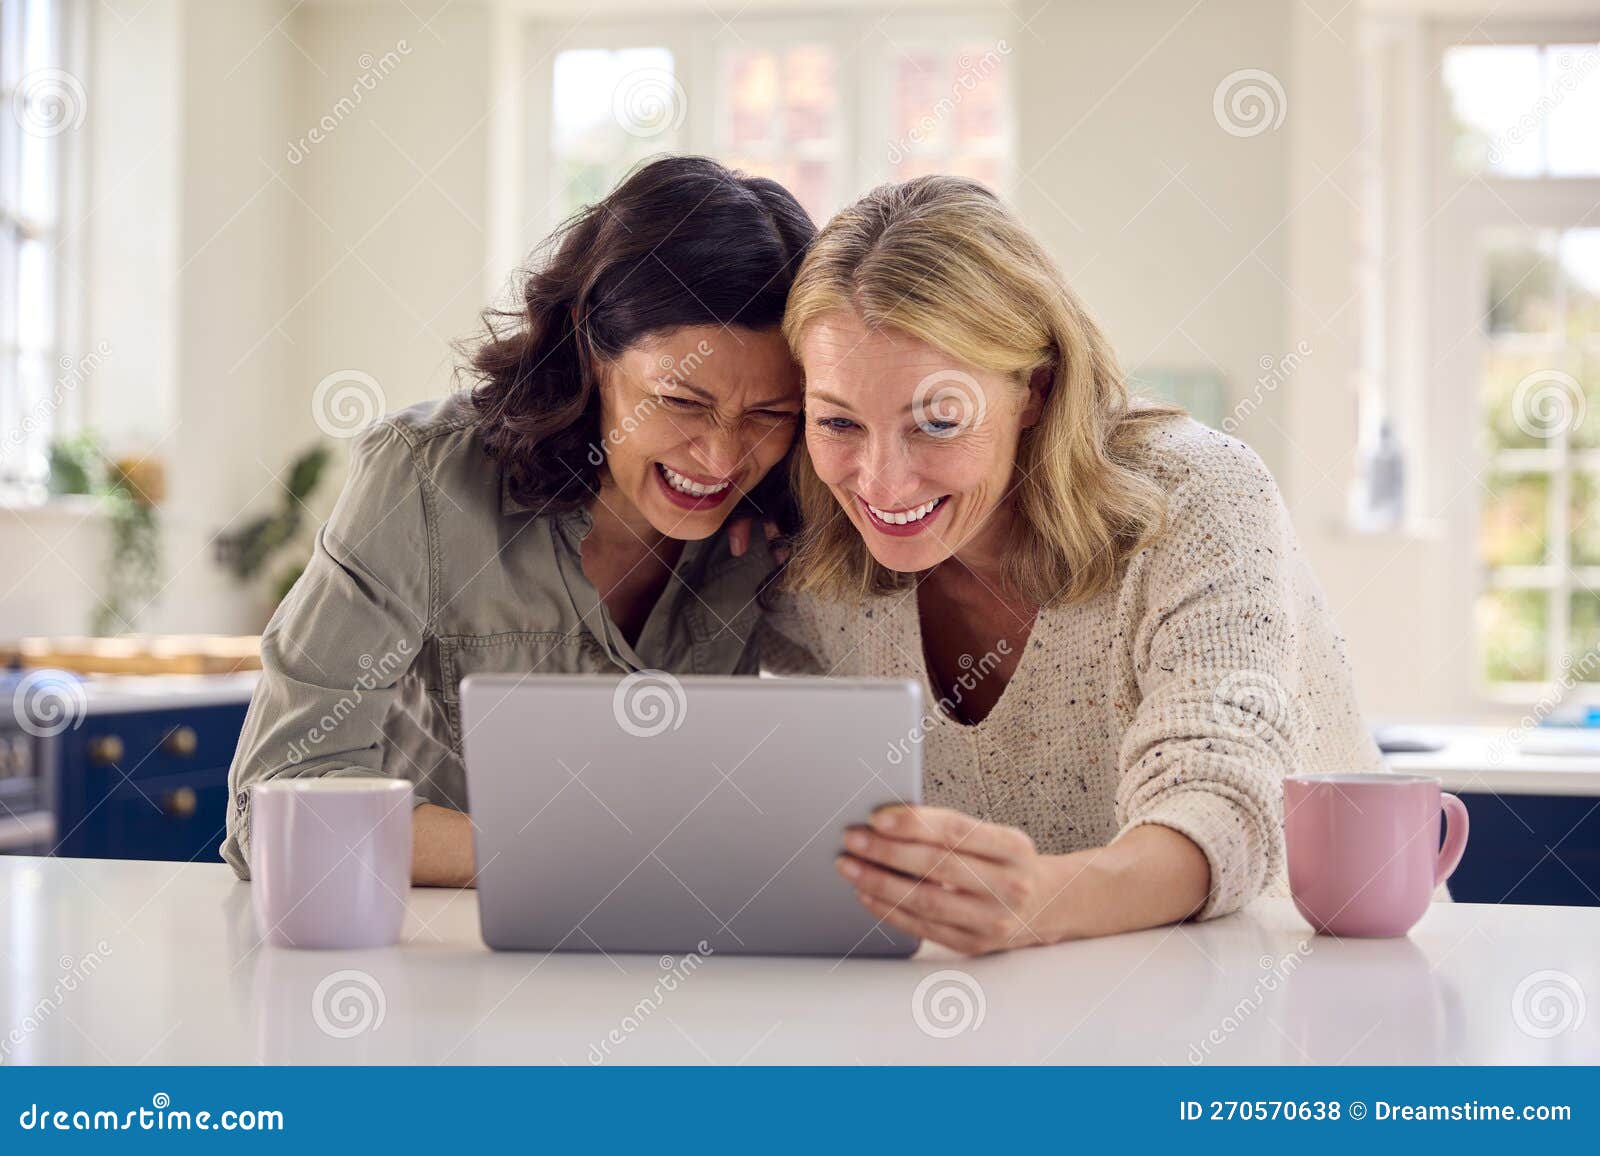 Same Sex Mature Female Couple Using Digital Tablet at Home To Stream Movie Stock Photo